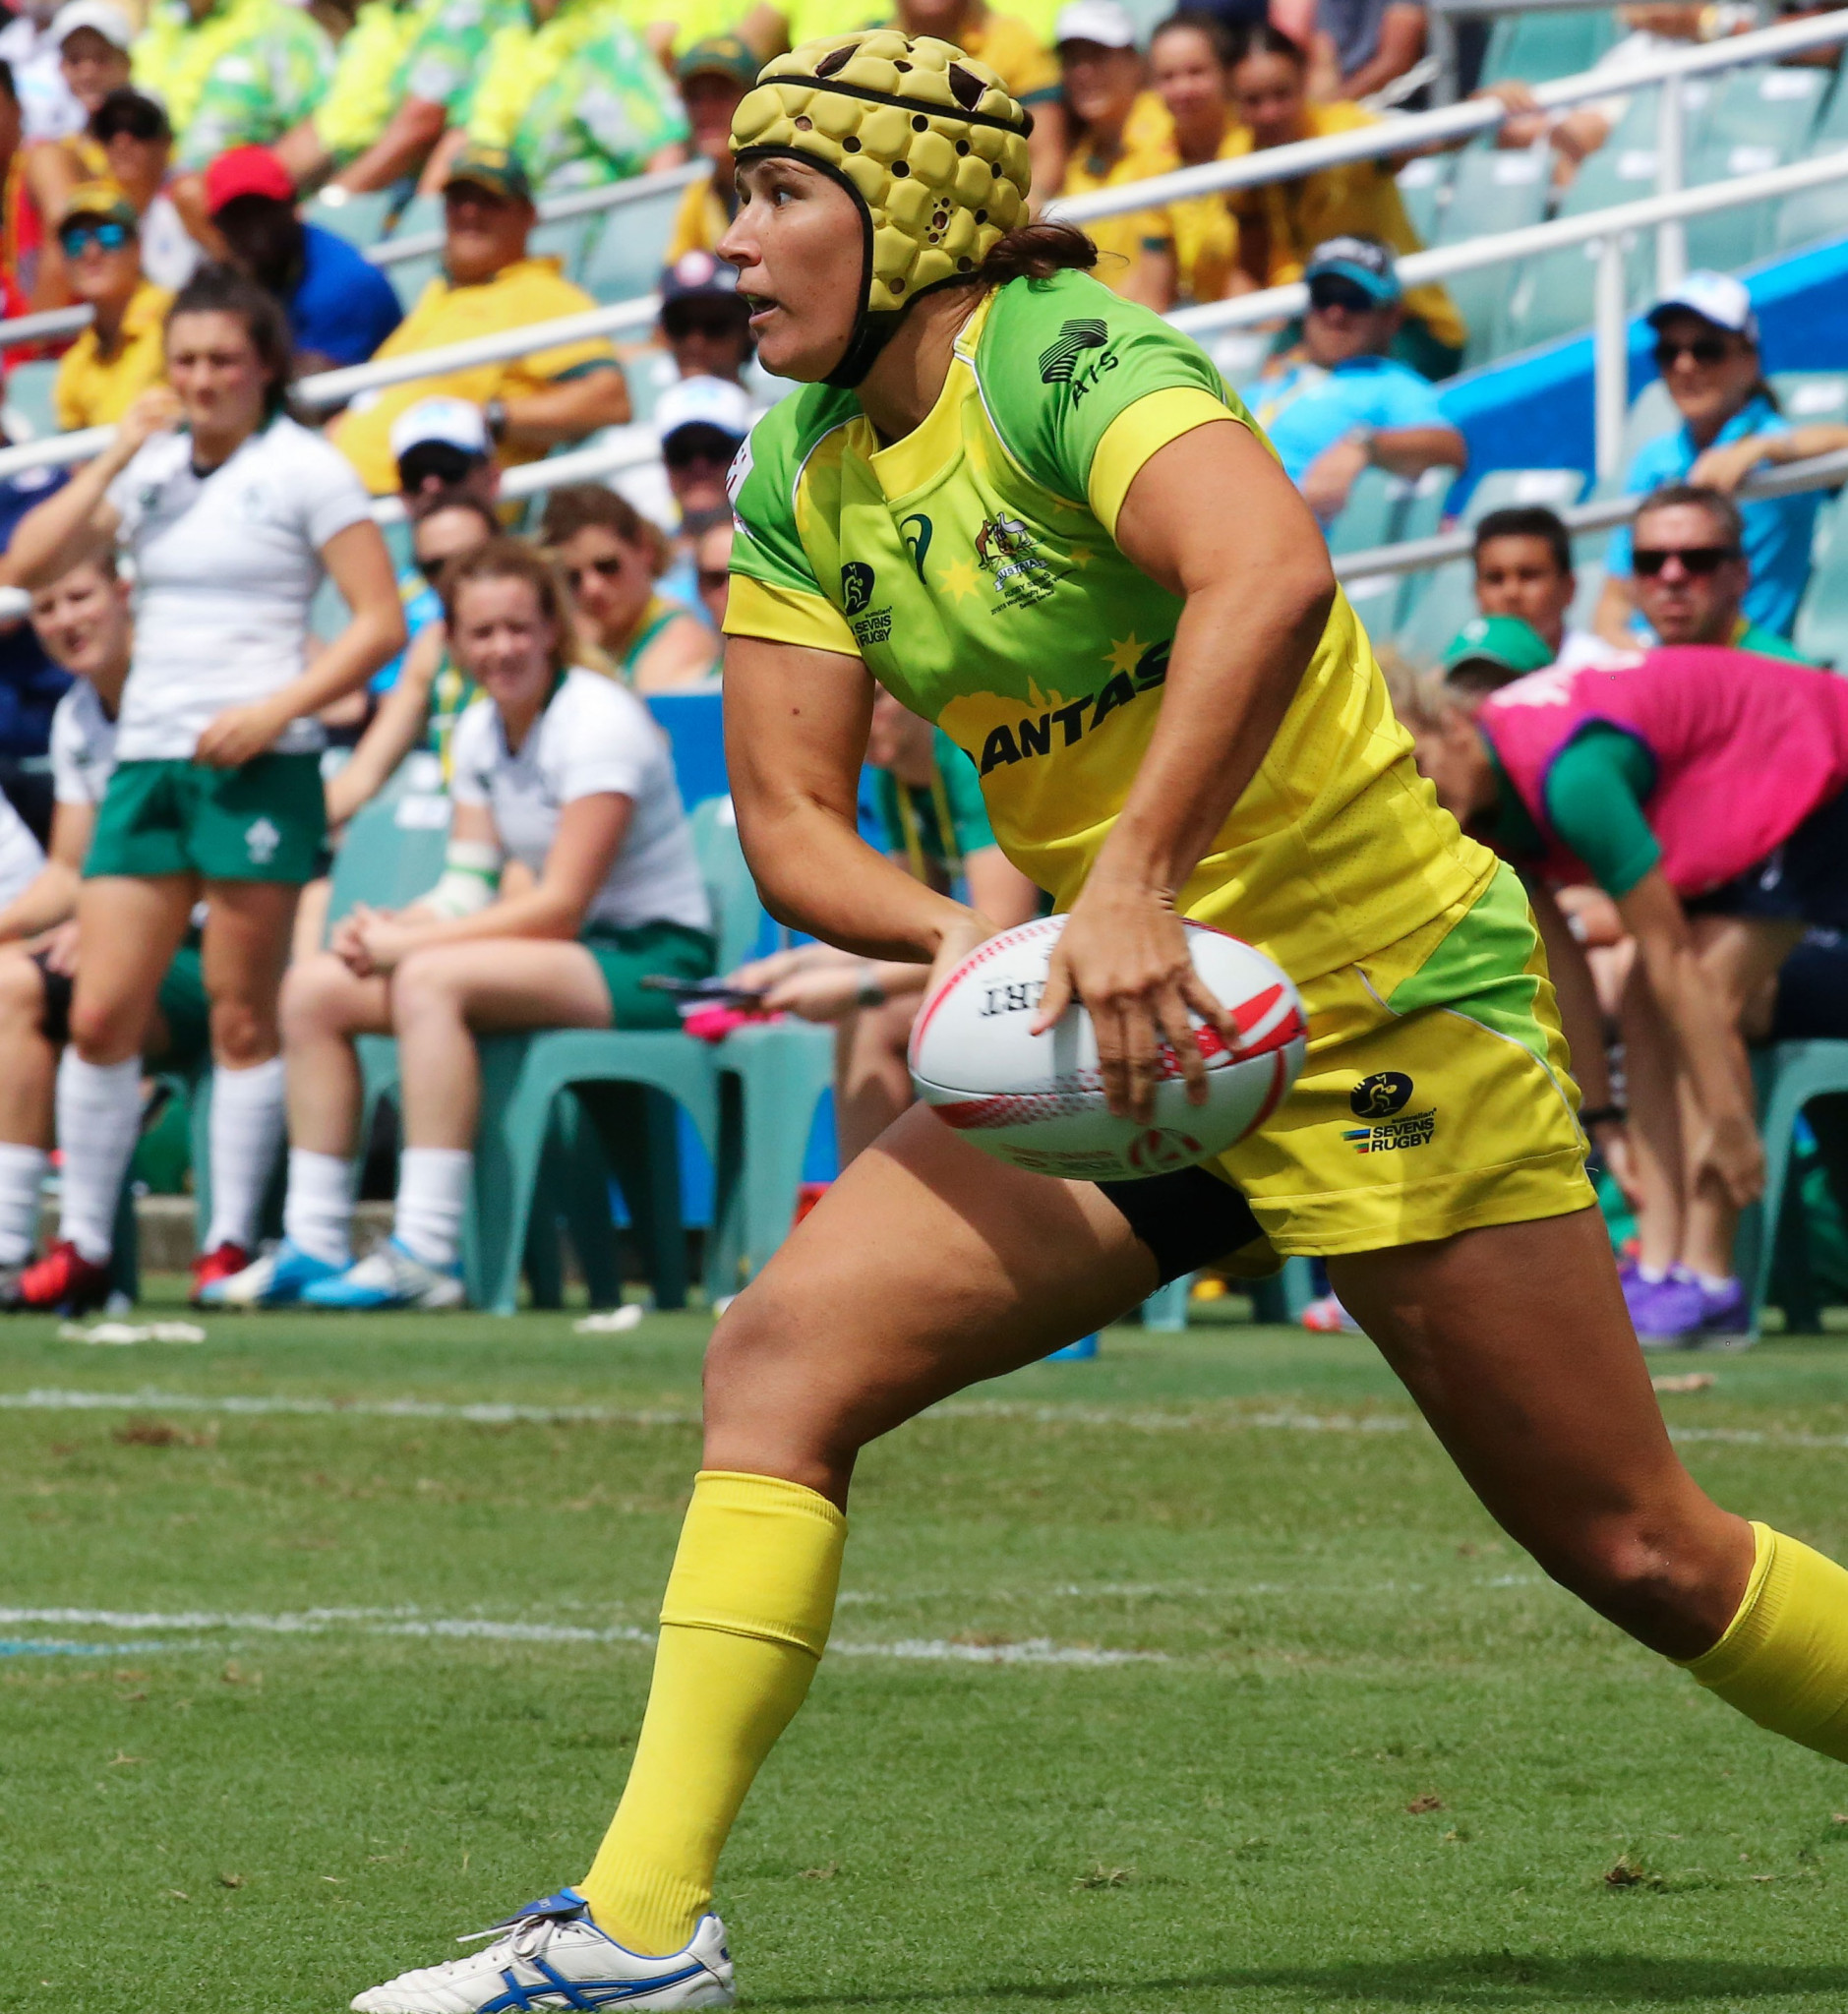 Shannon Parry helped lead the Australian women's sevens team to the Olympic gold medal at Rio 2016 ©Getty Images